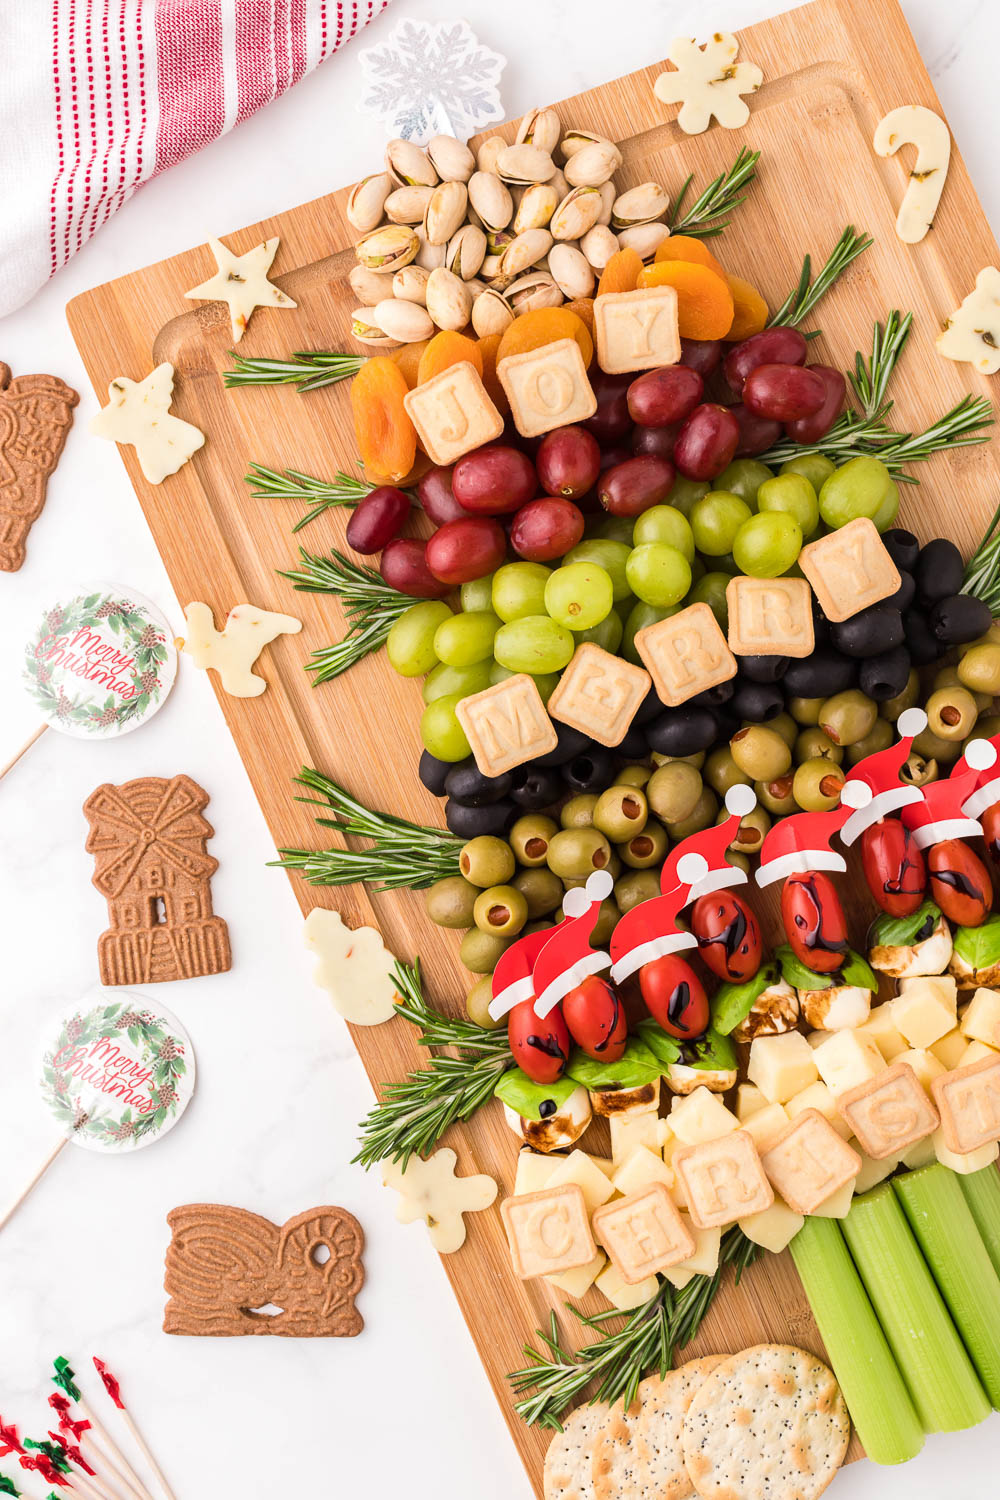 A wooden board at an angle filled with snacks, fruits and food in the shape of a Christmas tree with cookies and signs on the side.